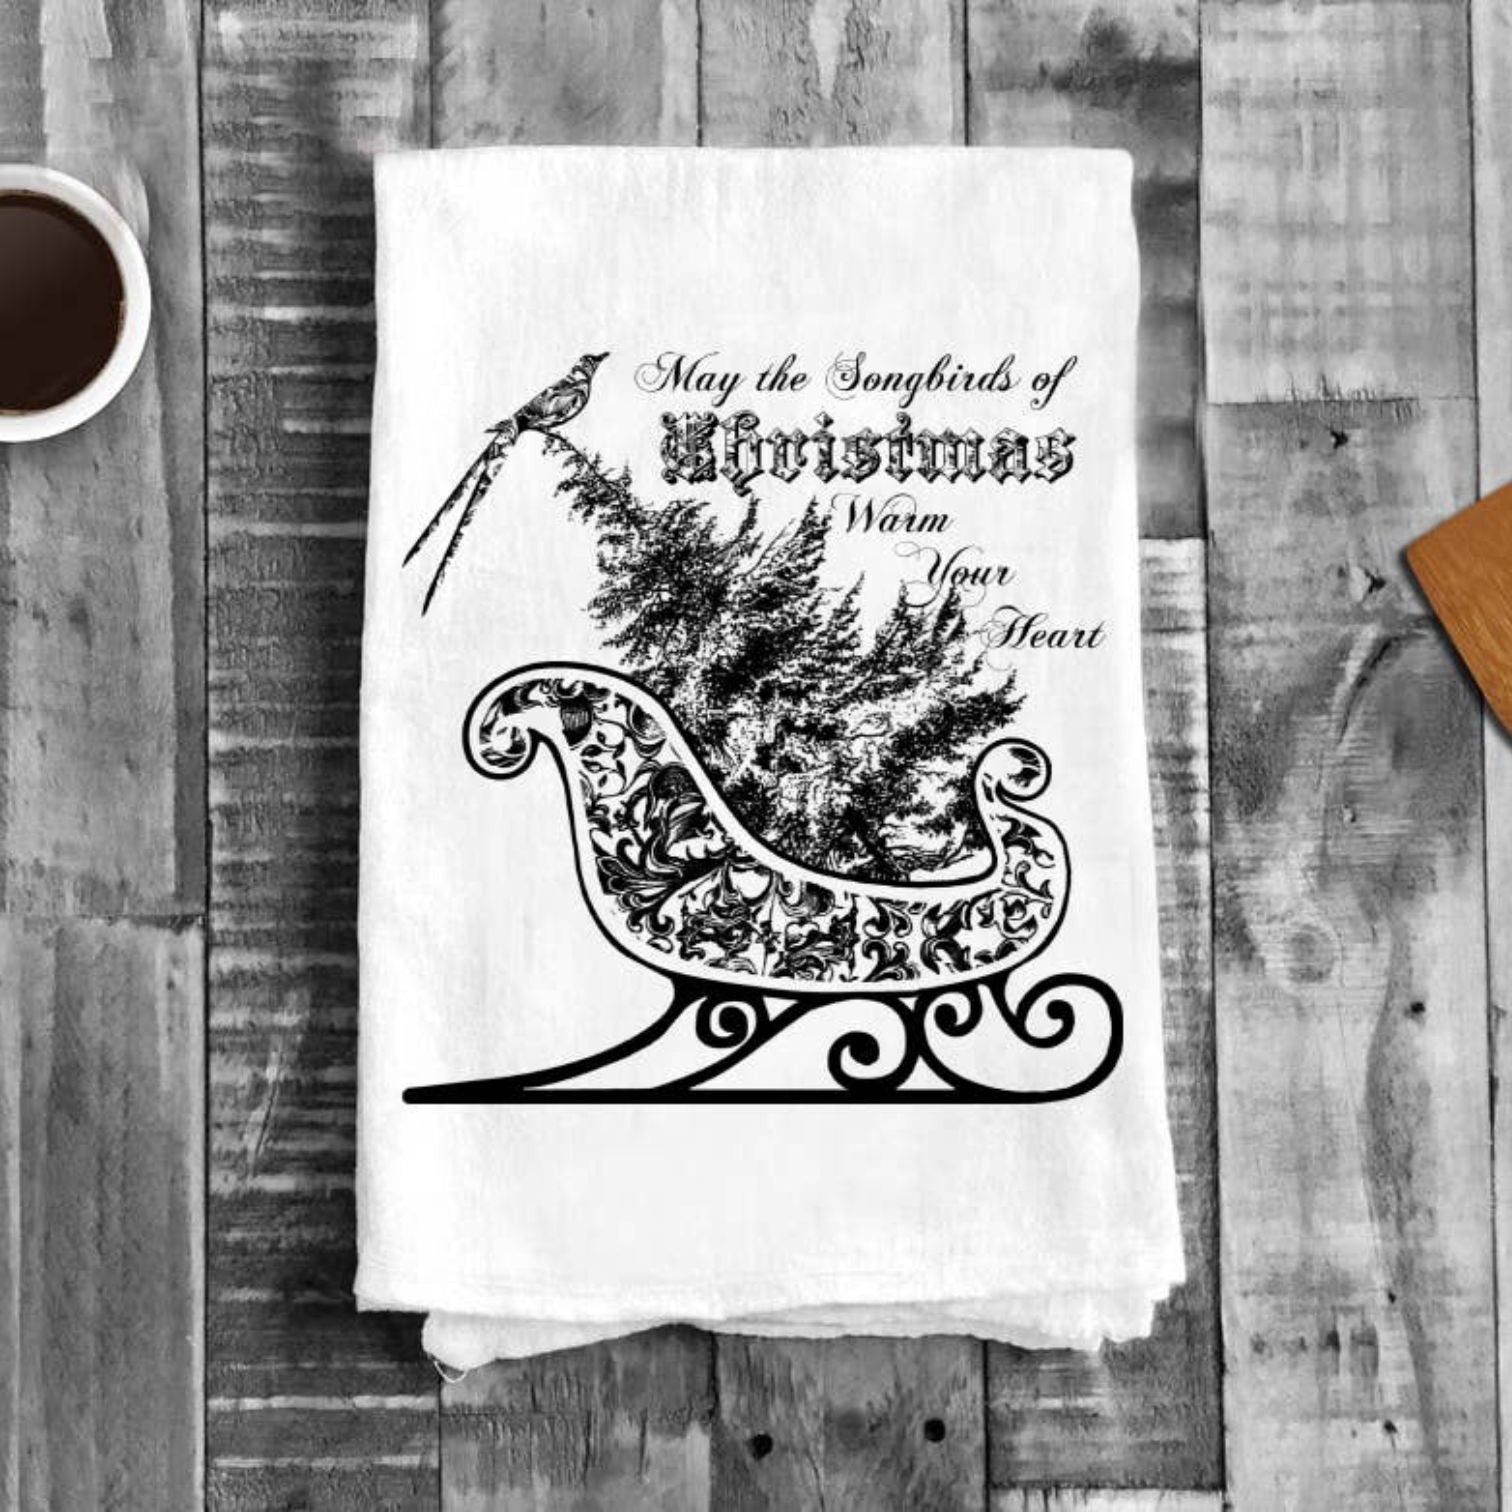 Songbirds of Christmas Warm Your Heart, Cotton Tea Towels